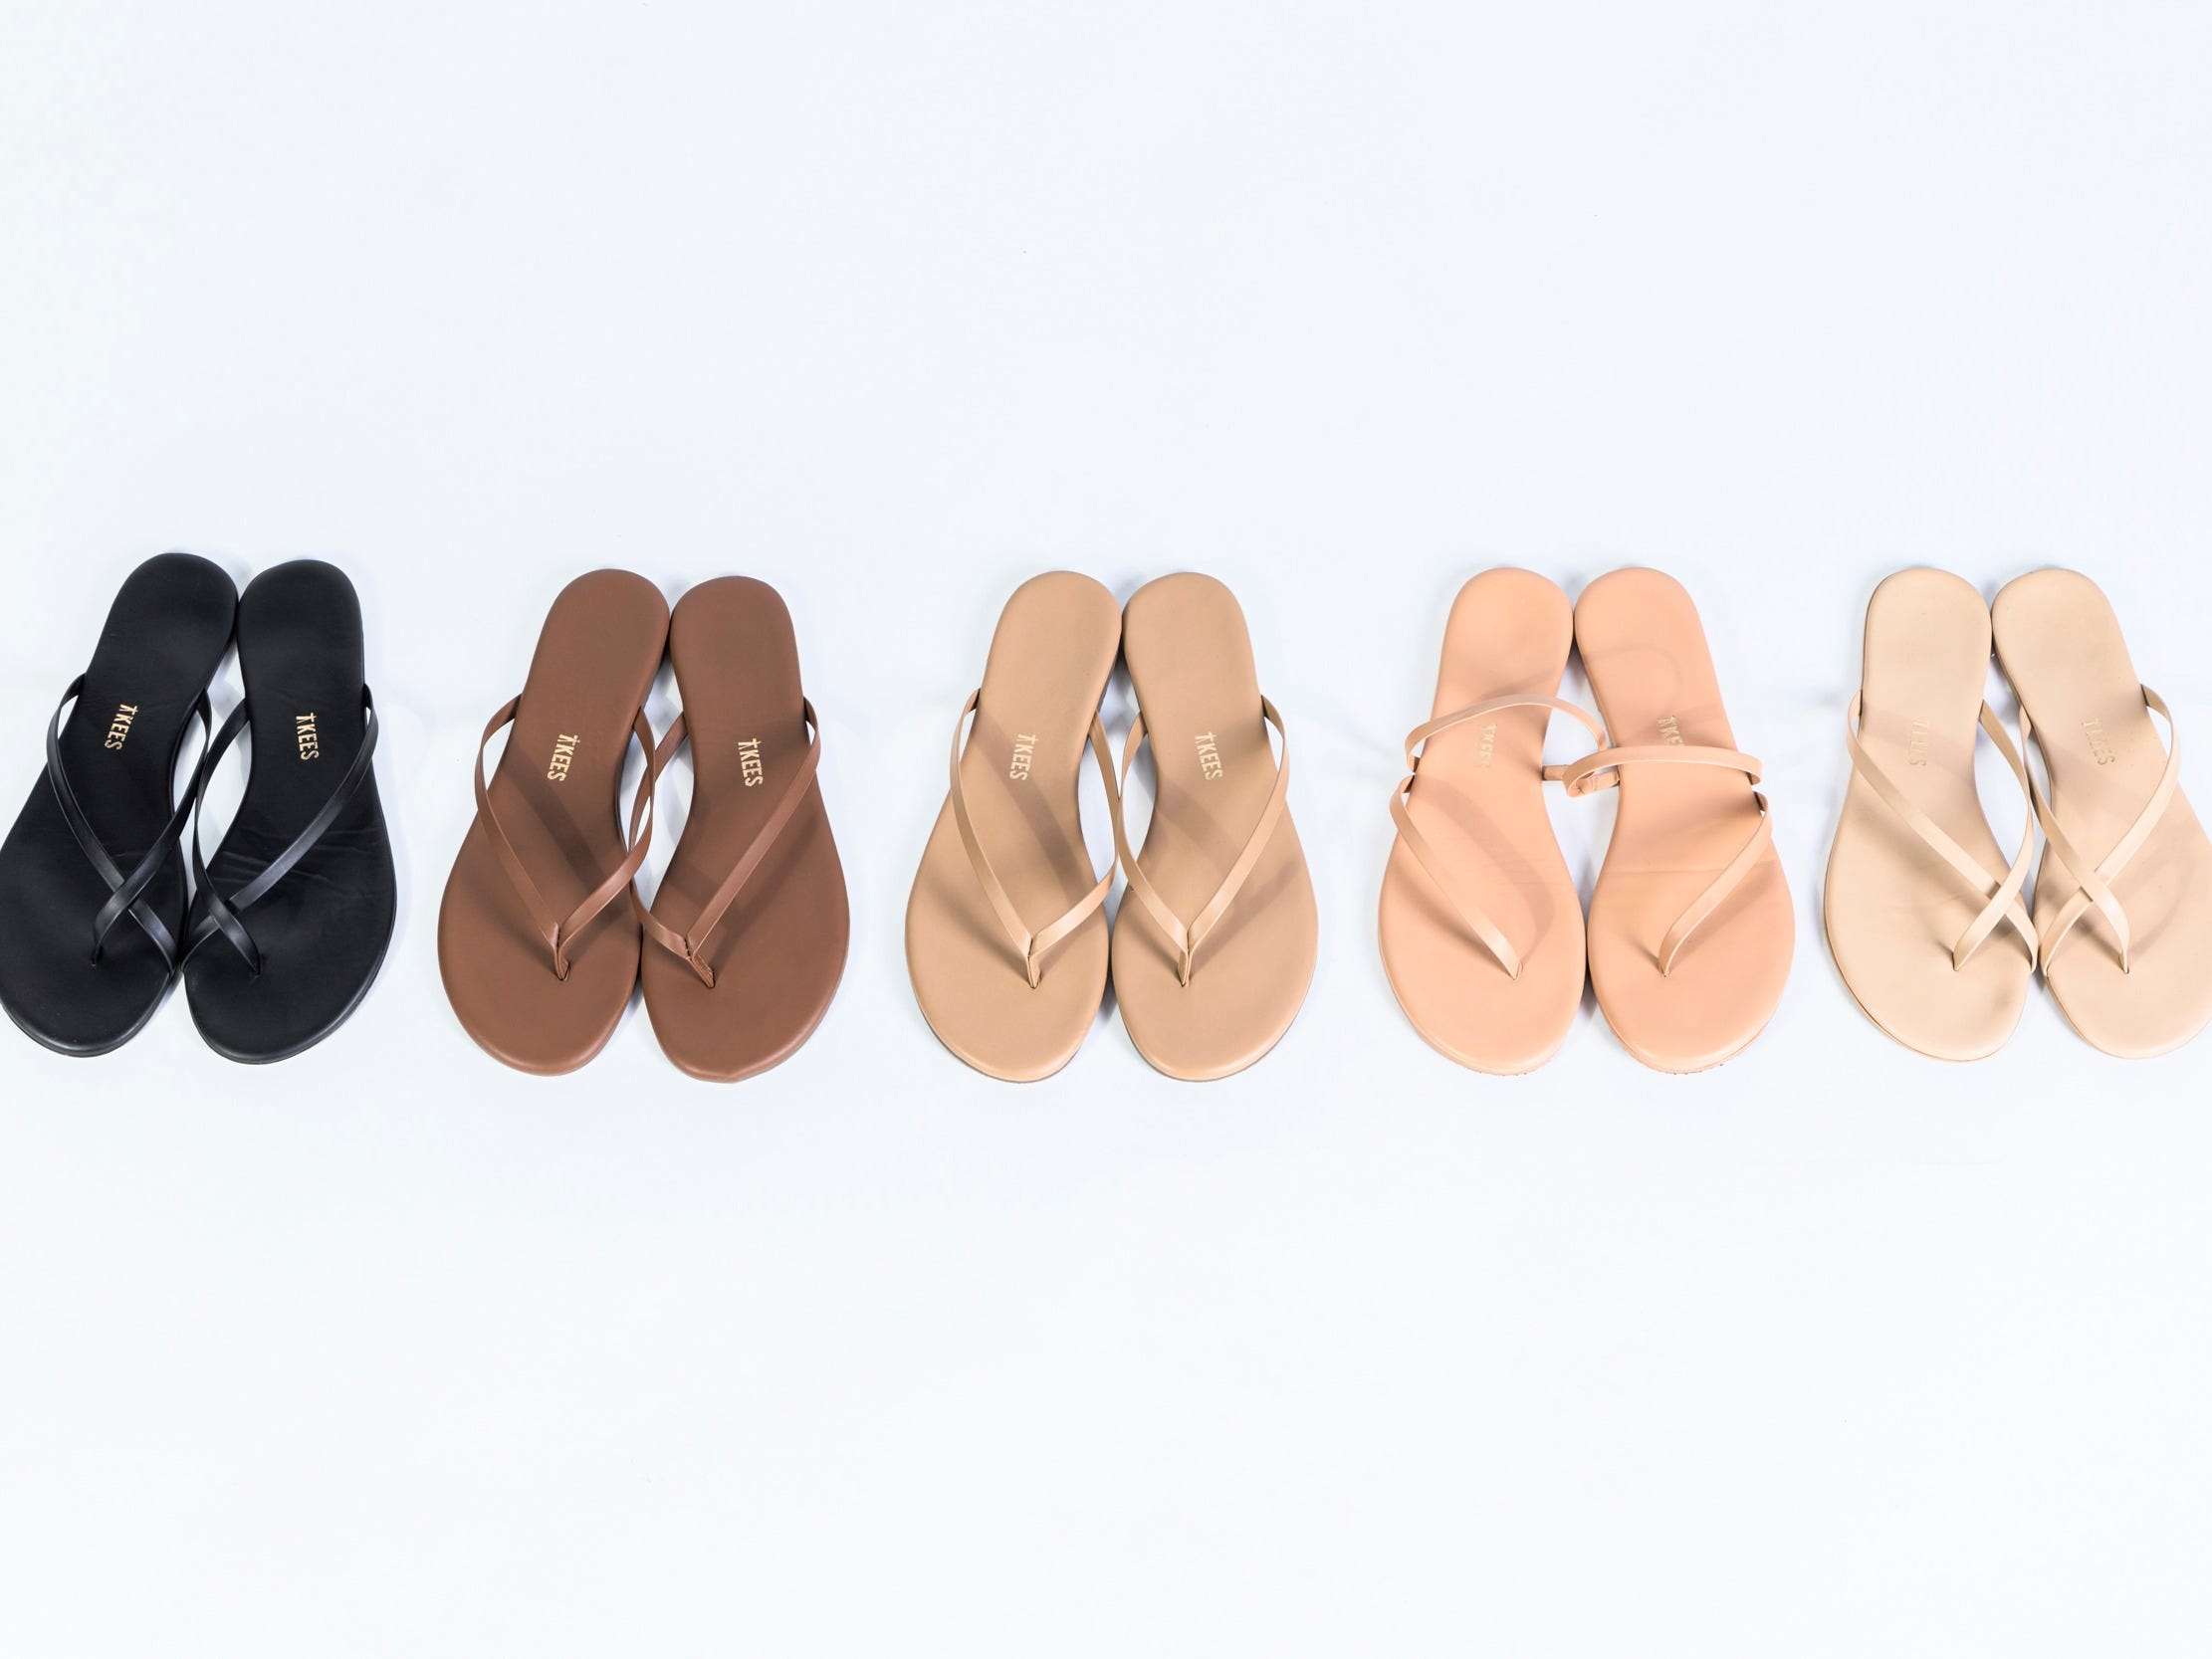 This Sandal Company Launched A Line Of Minimalist Flip Flops In A Ton